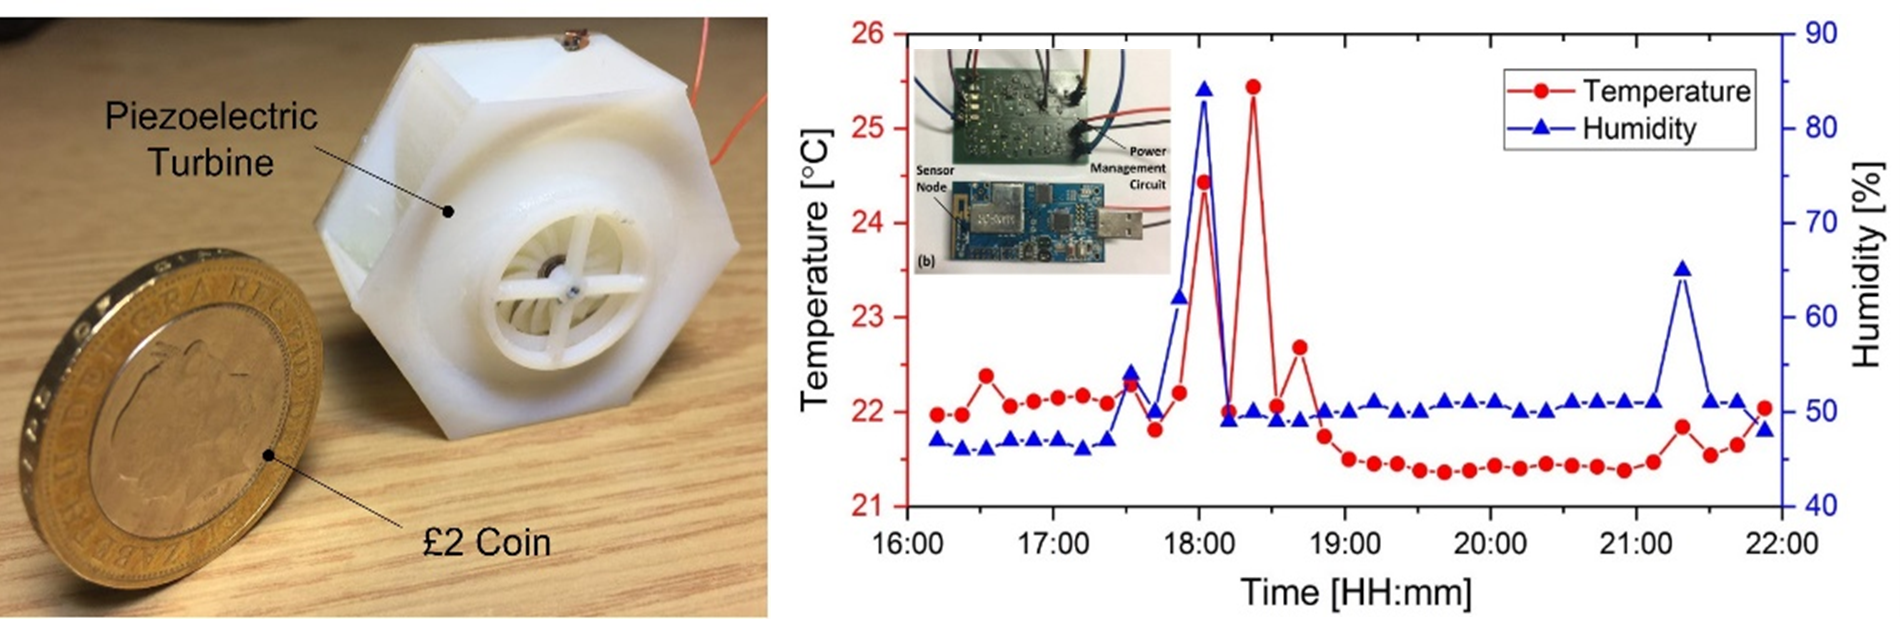 Two panels showing a photograph of the energy harvester turbine (about the size of a £2 coin) and a figure showing sensing data over a 6 hour period (temperature and humidity).